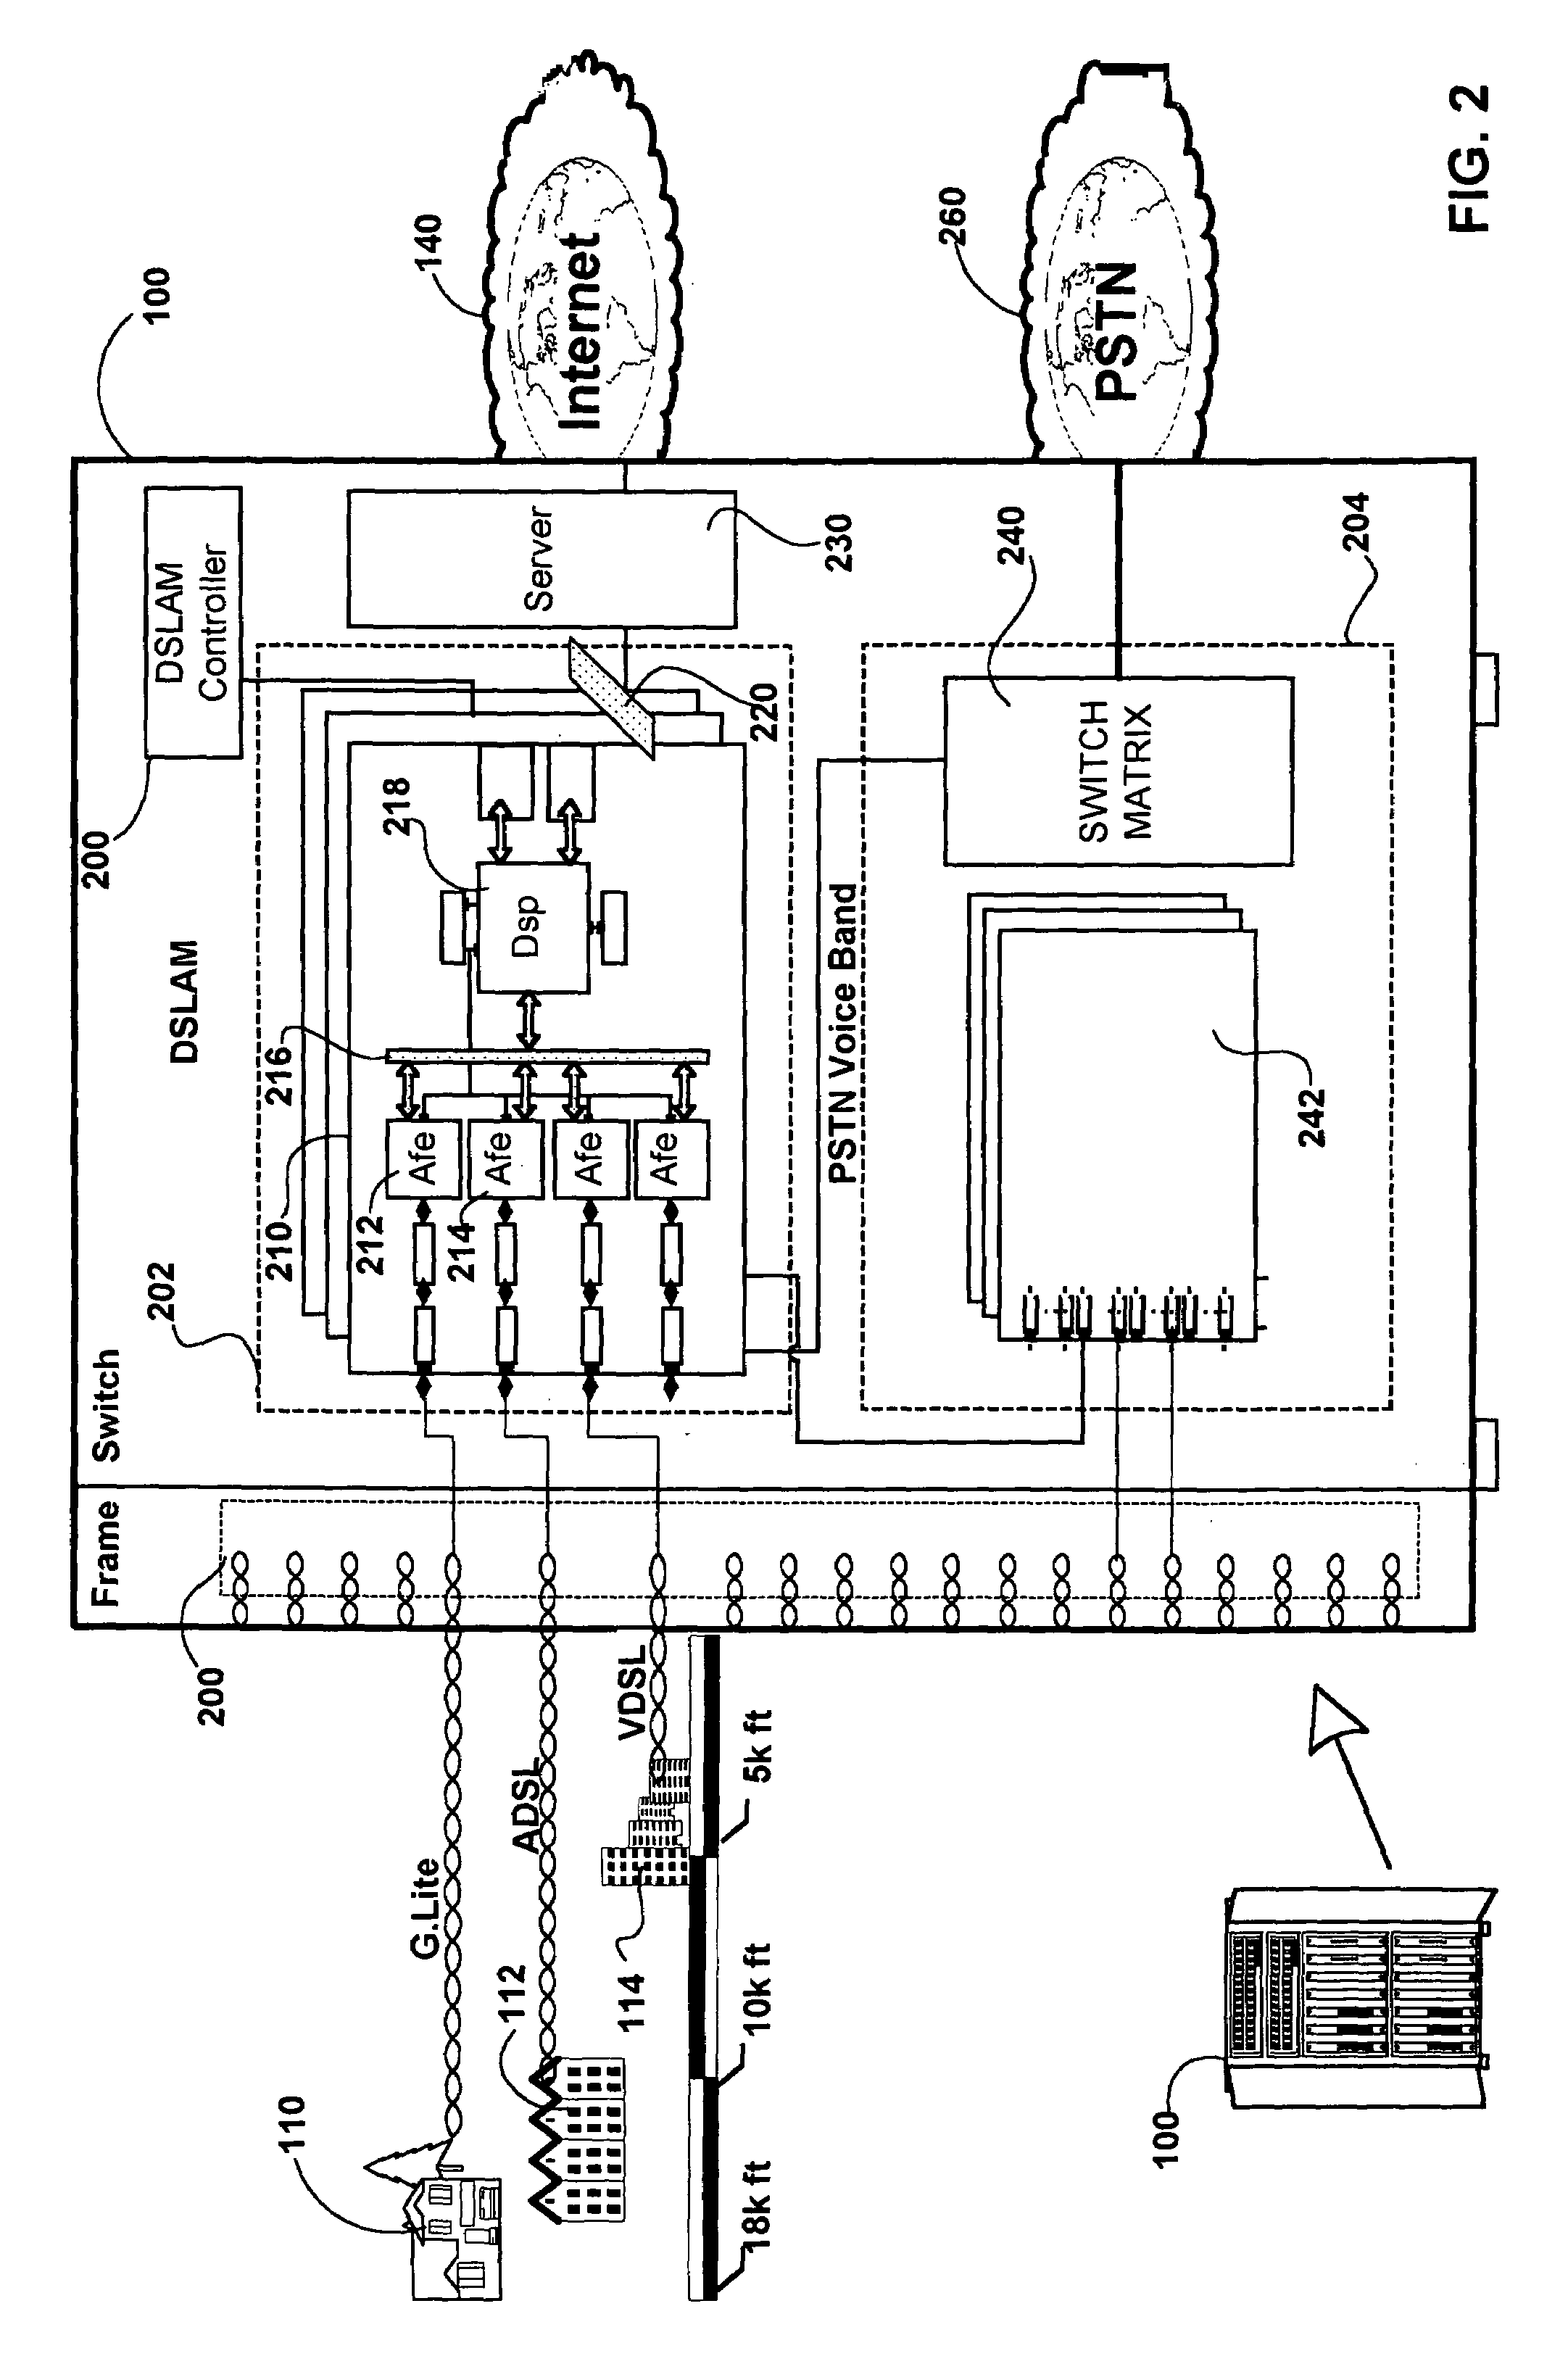 Method and apparatus for a DFT/IDFT engine supporting multiple X-DSL protocols